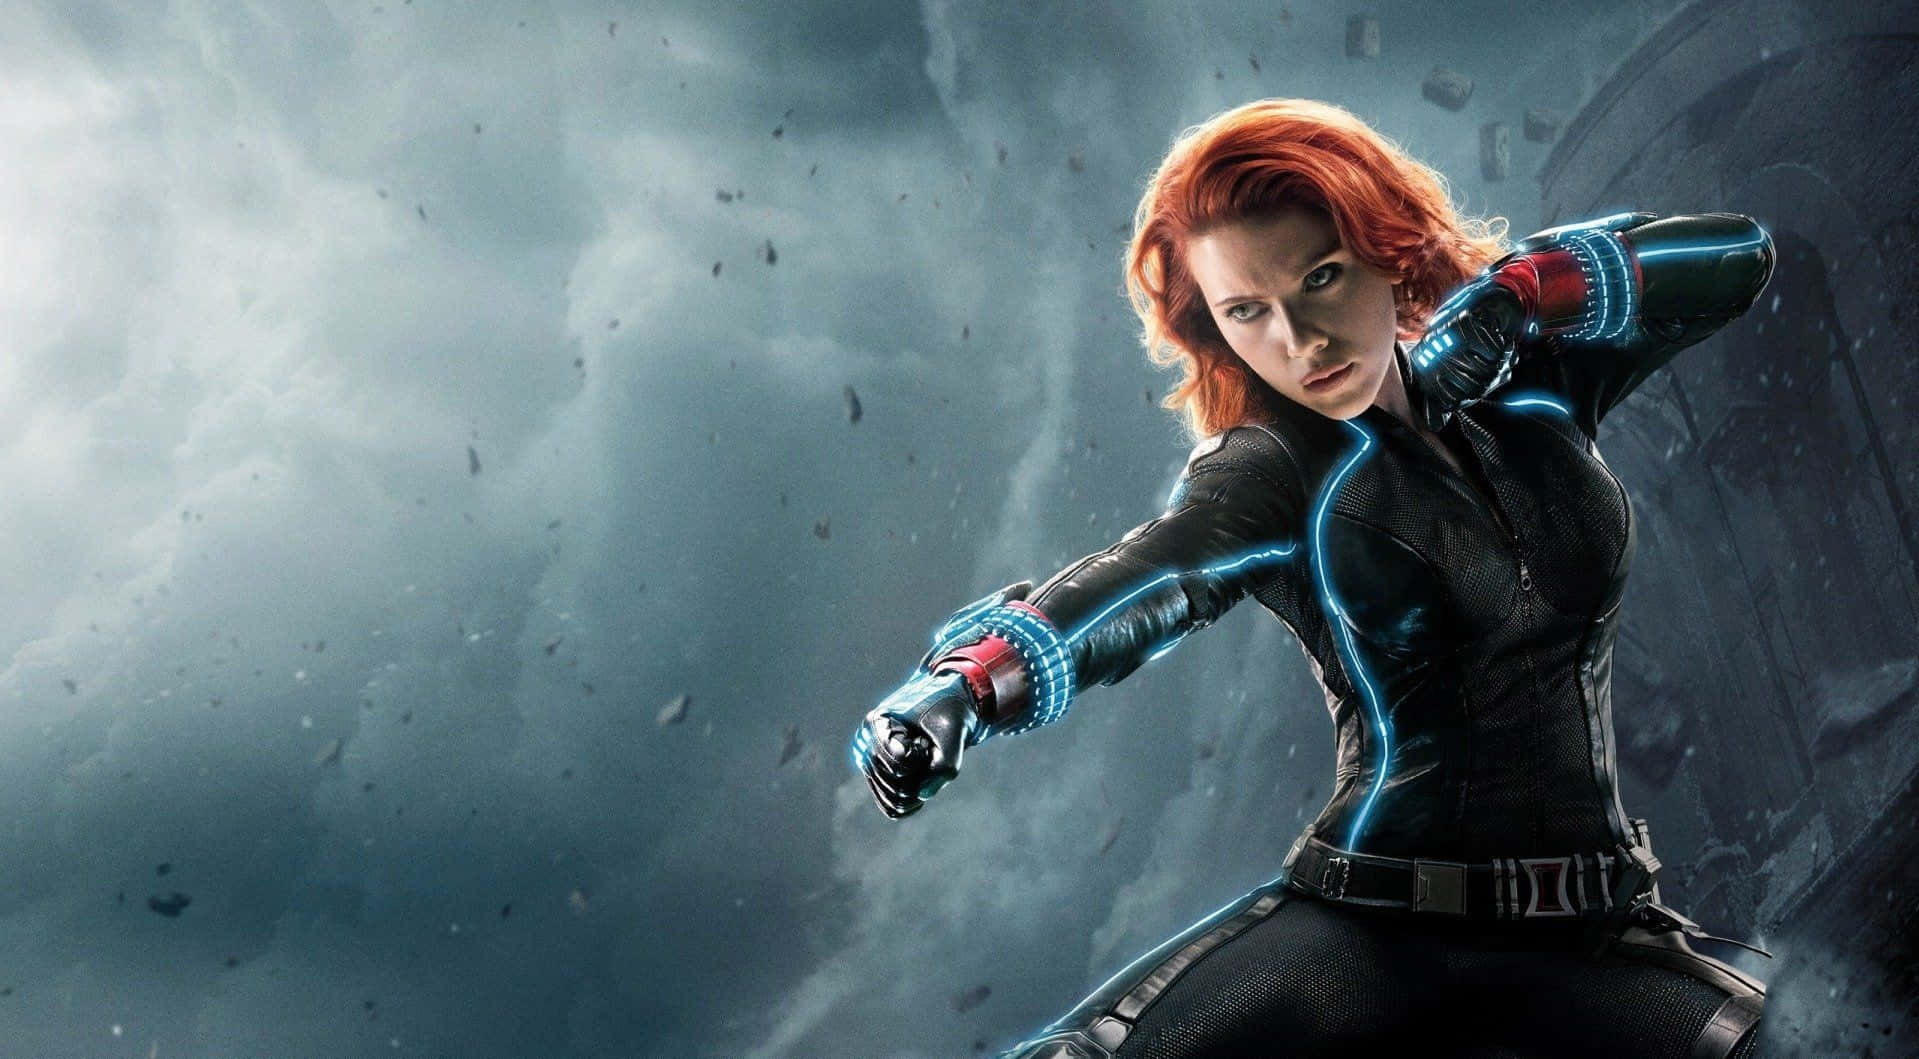 "Hope is what makes us strong" - Black Widow